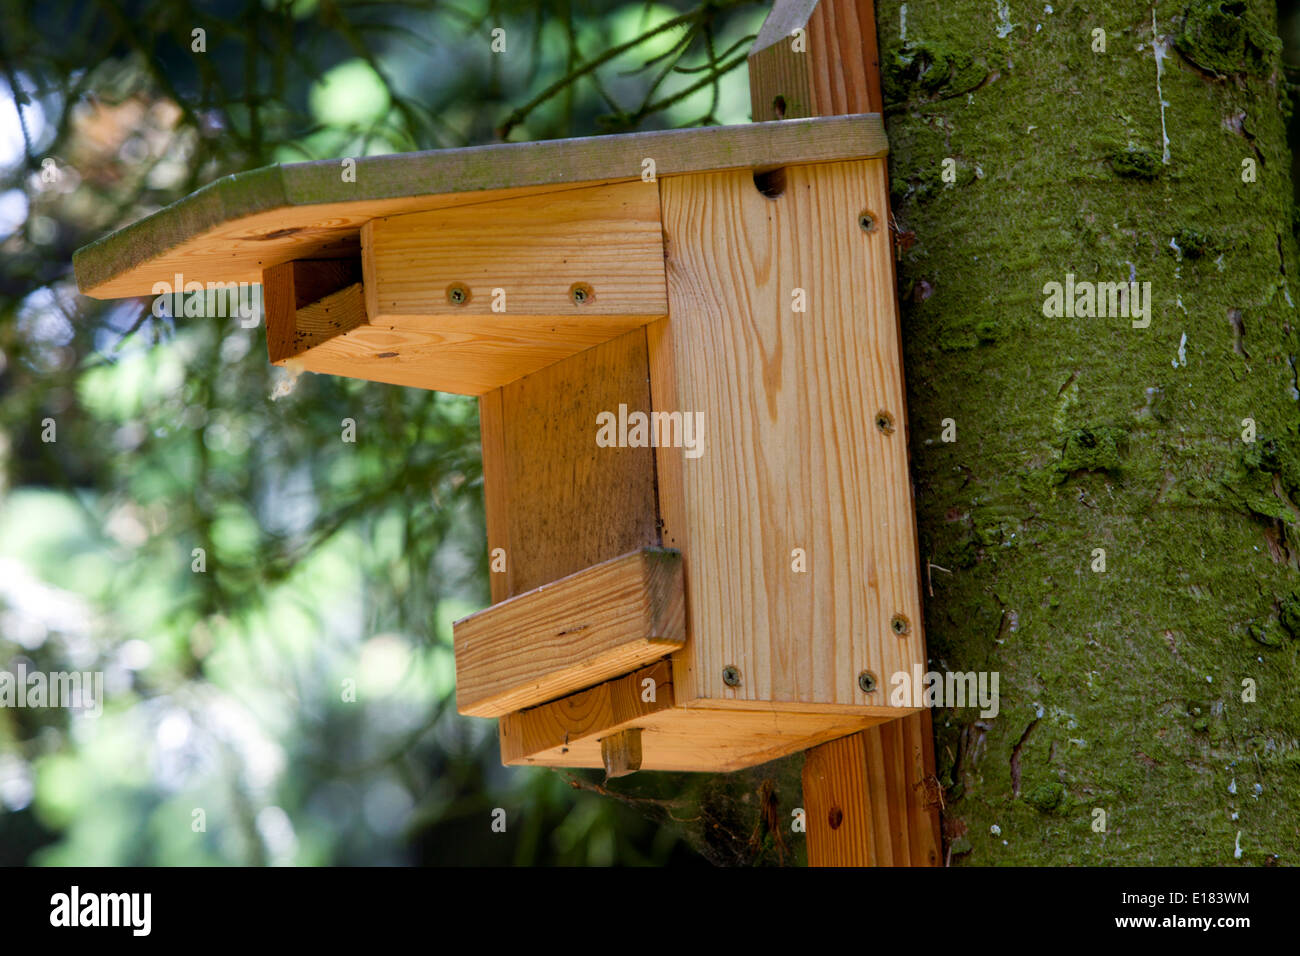 Safe birdhouse against predators on a tree in the forest, a wooden box for nesting birds Stock Photo